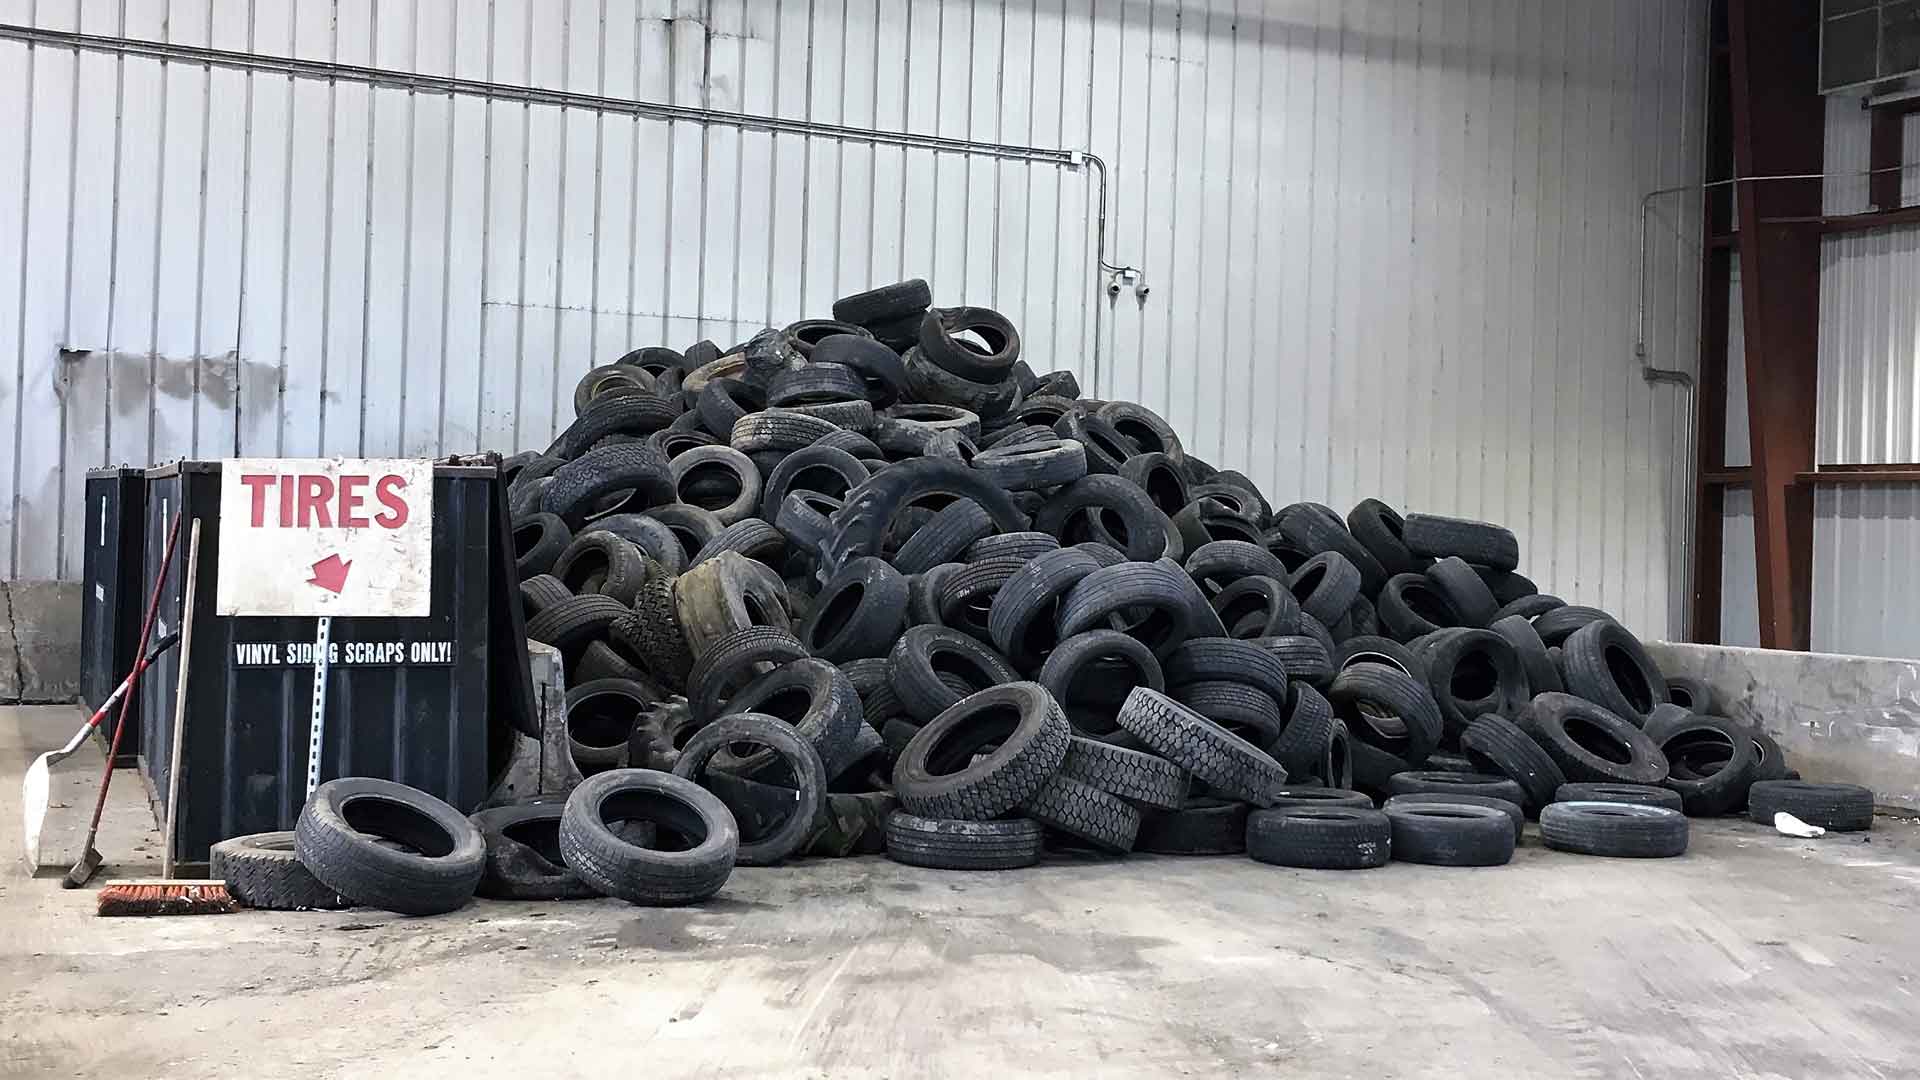 Pile of old tires to be recycled